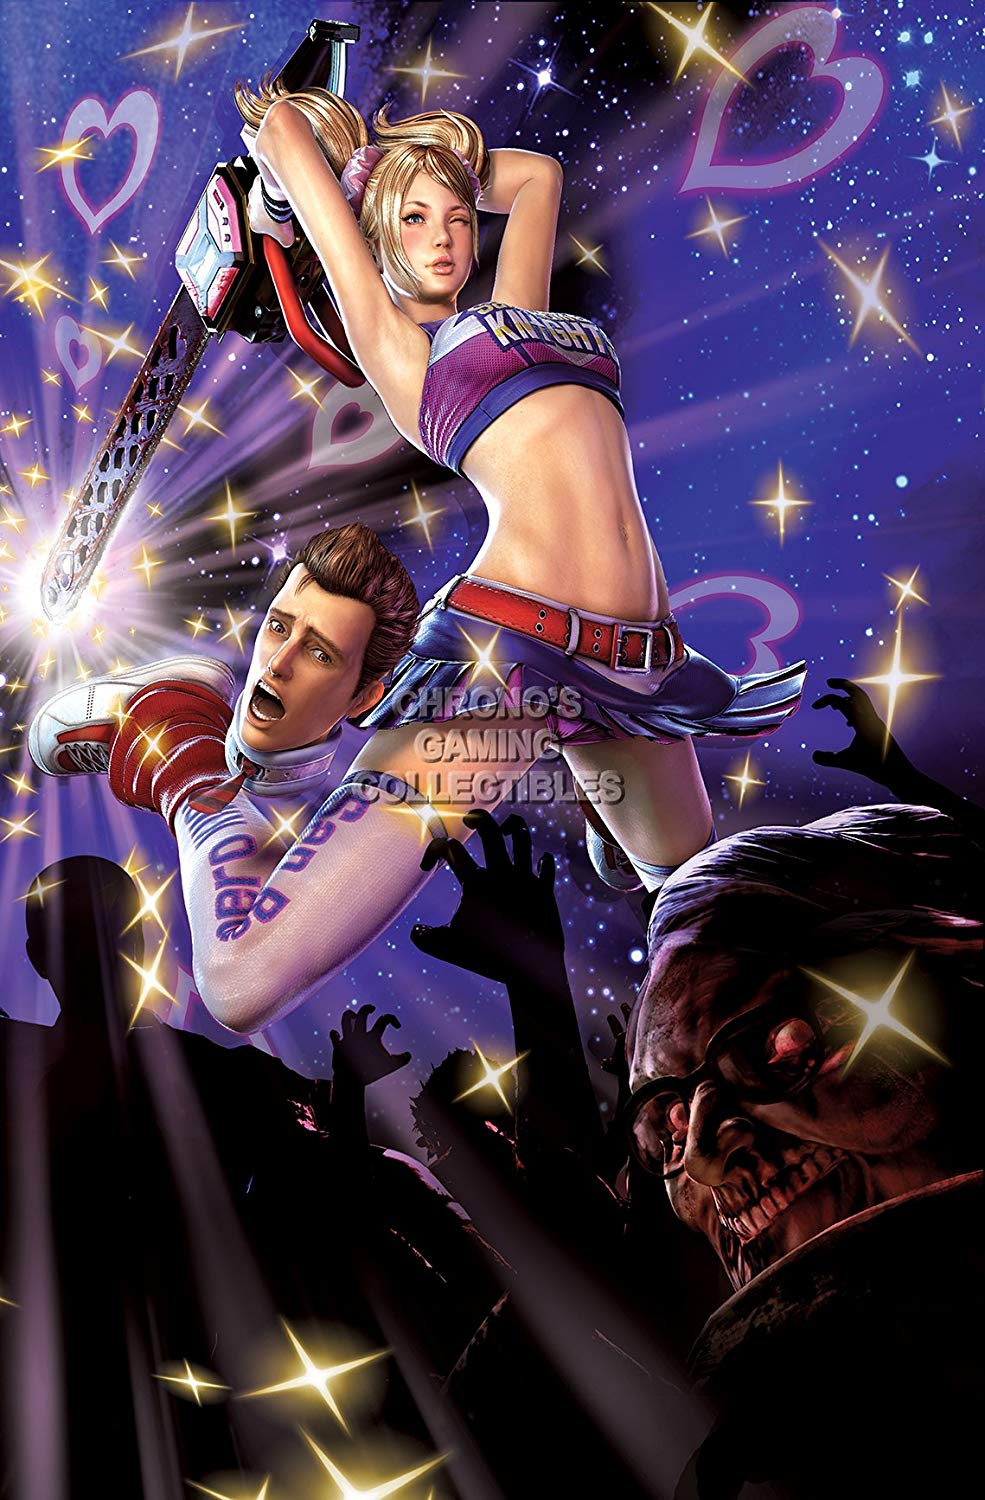 Cgc Huge Poster - Lollipop Chainsaw Ps3 , HD Wallpaper & Backgrounds